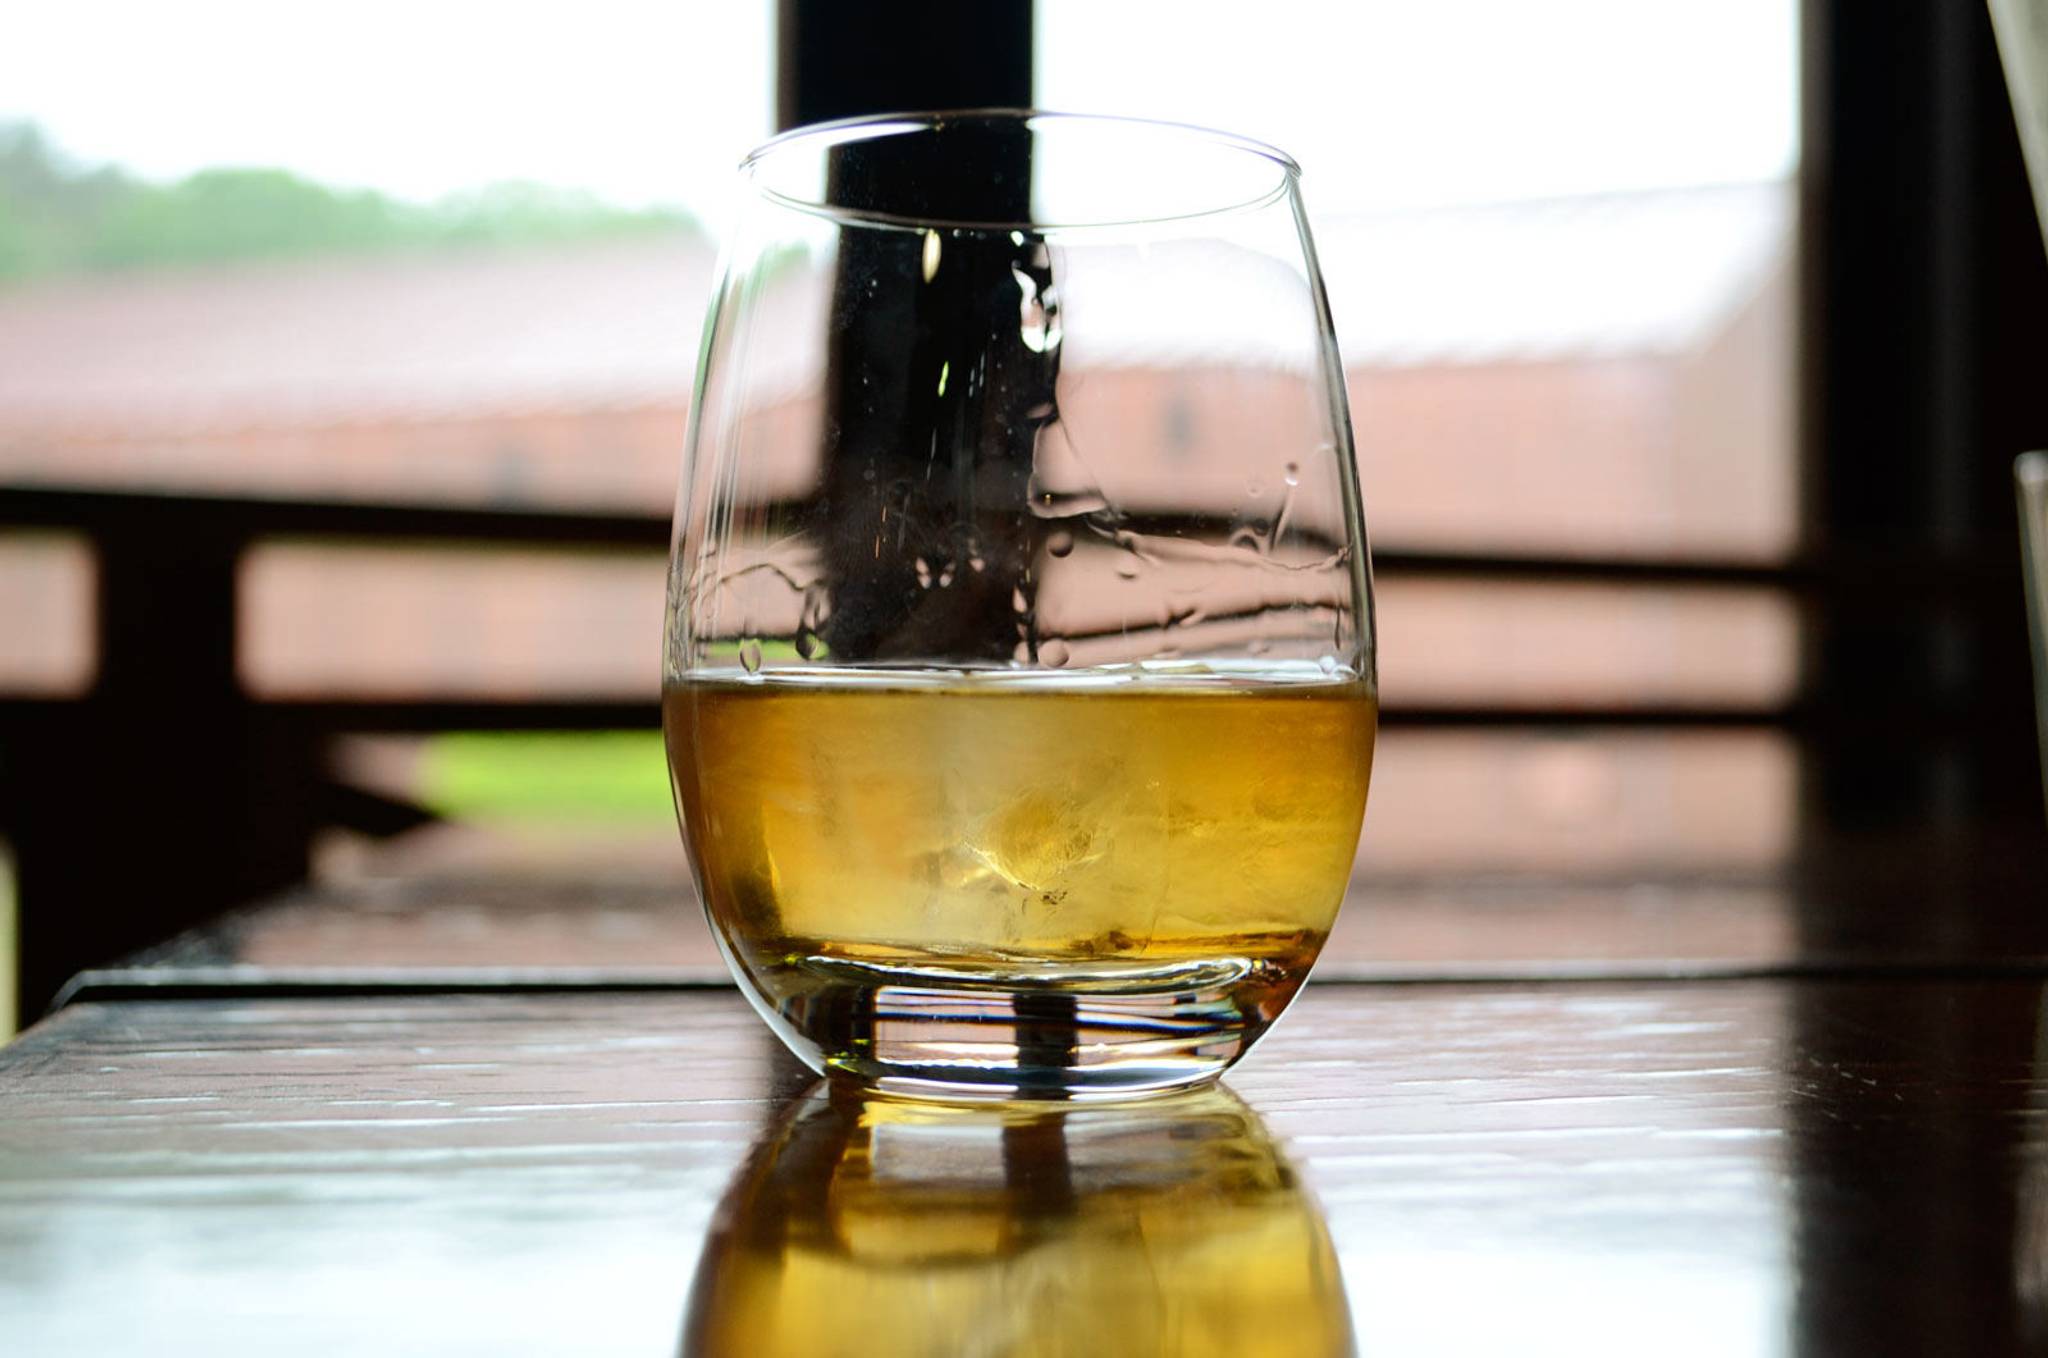 India gets a taste for scotch whisky